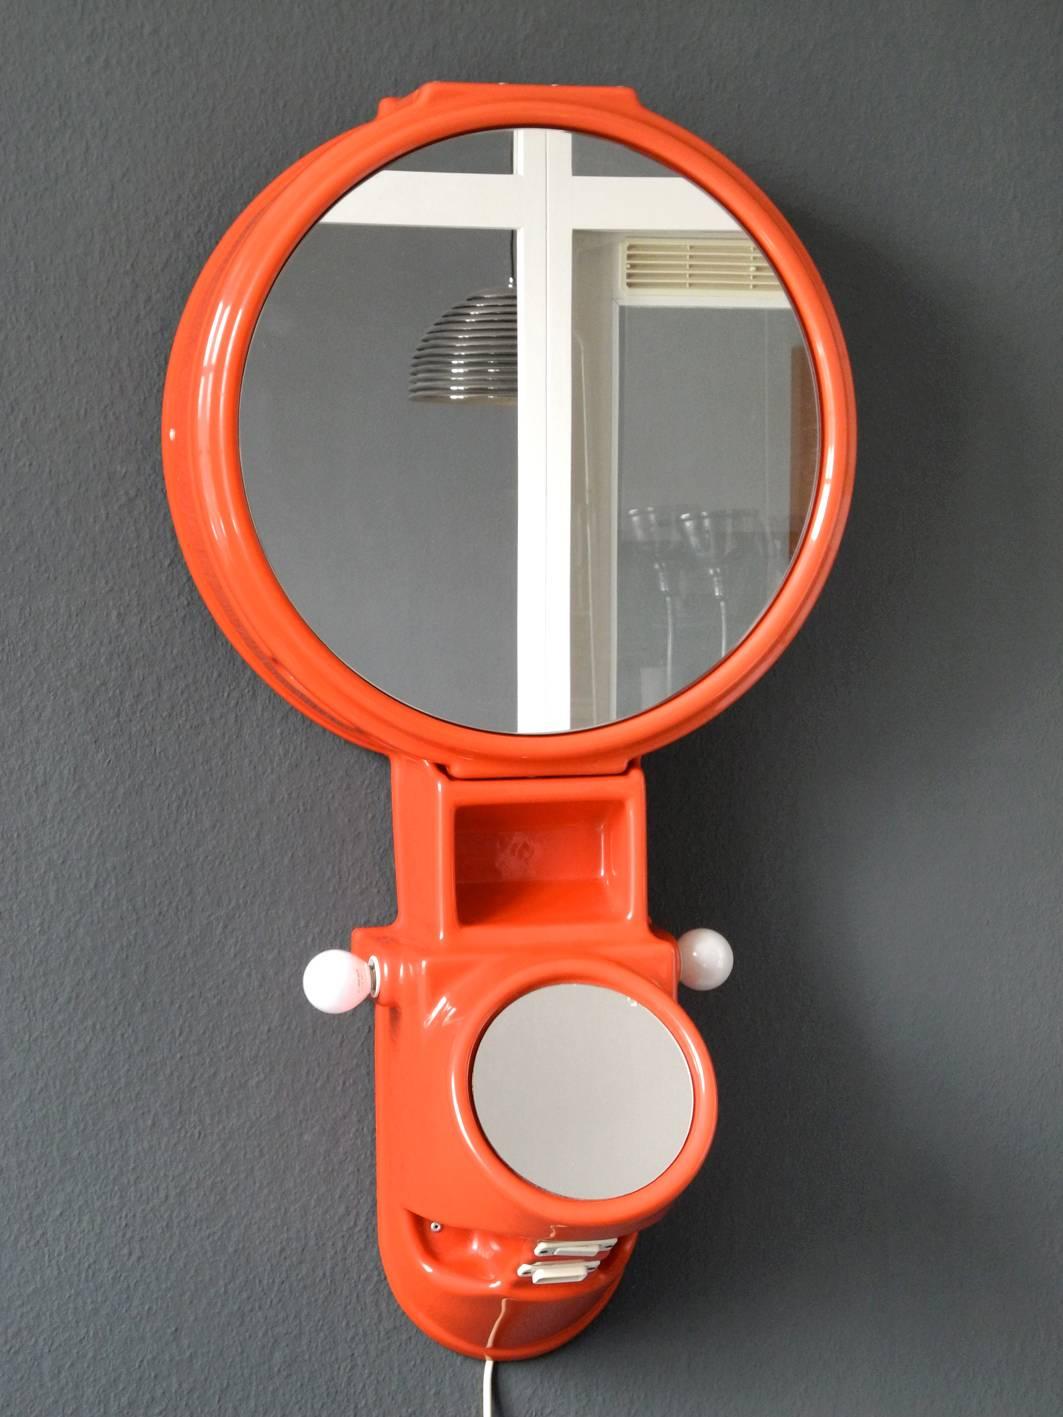 1970s Space Age plastic mirror cabinet with lighting and foldable mirror.
Super great expensive Italian design with many storage possibilities.
The color is a dark old orange.
Below there is the switch for the two E14 sockets and an Italian